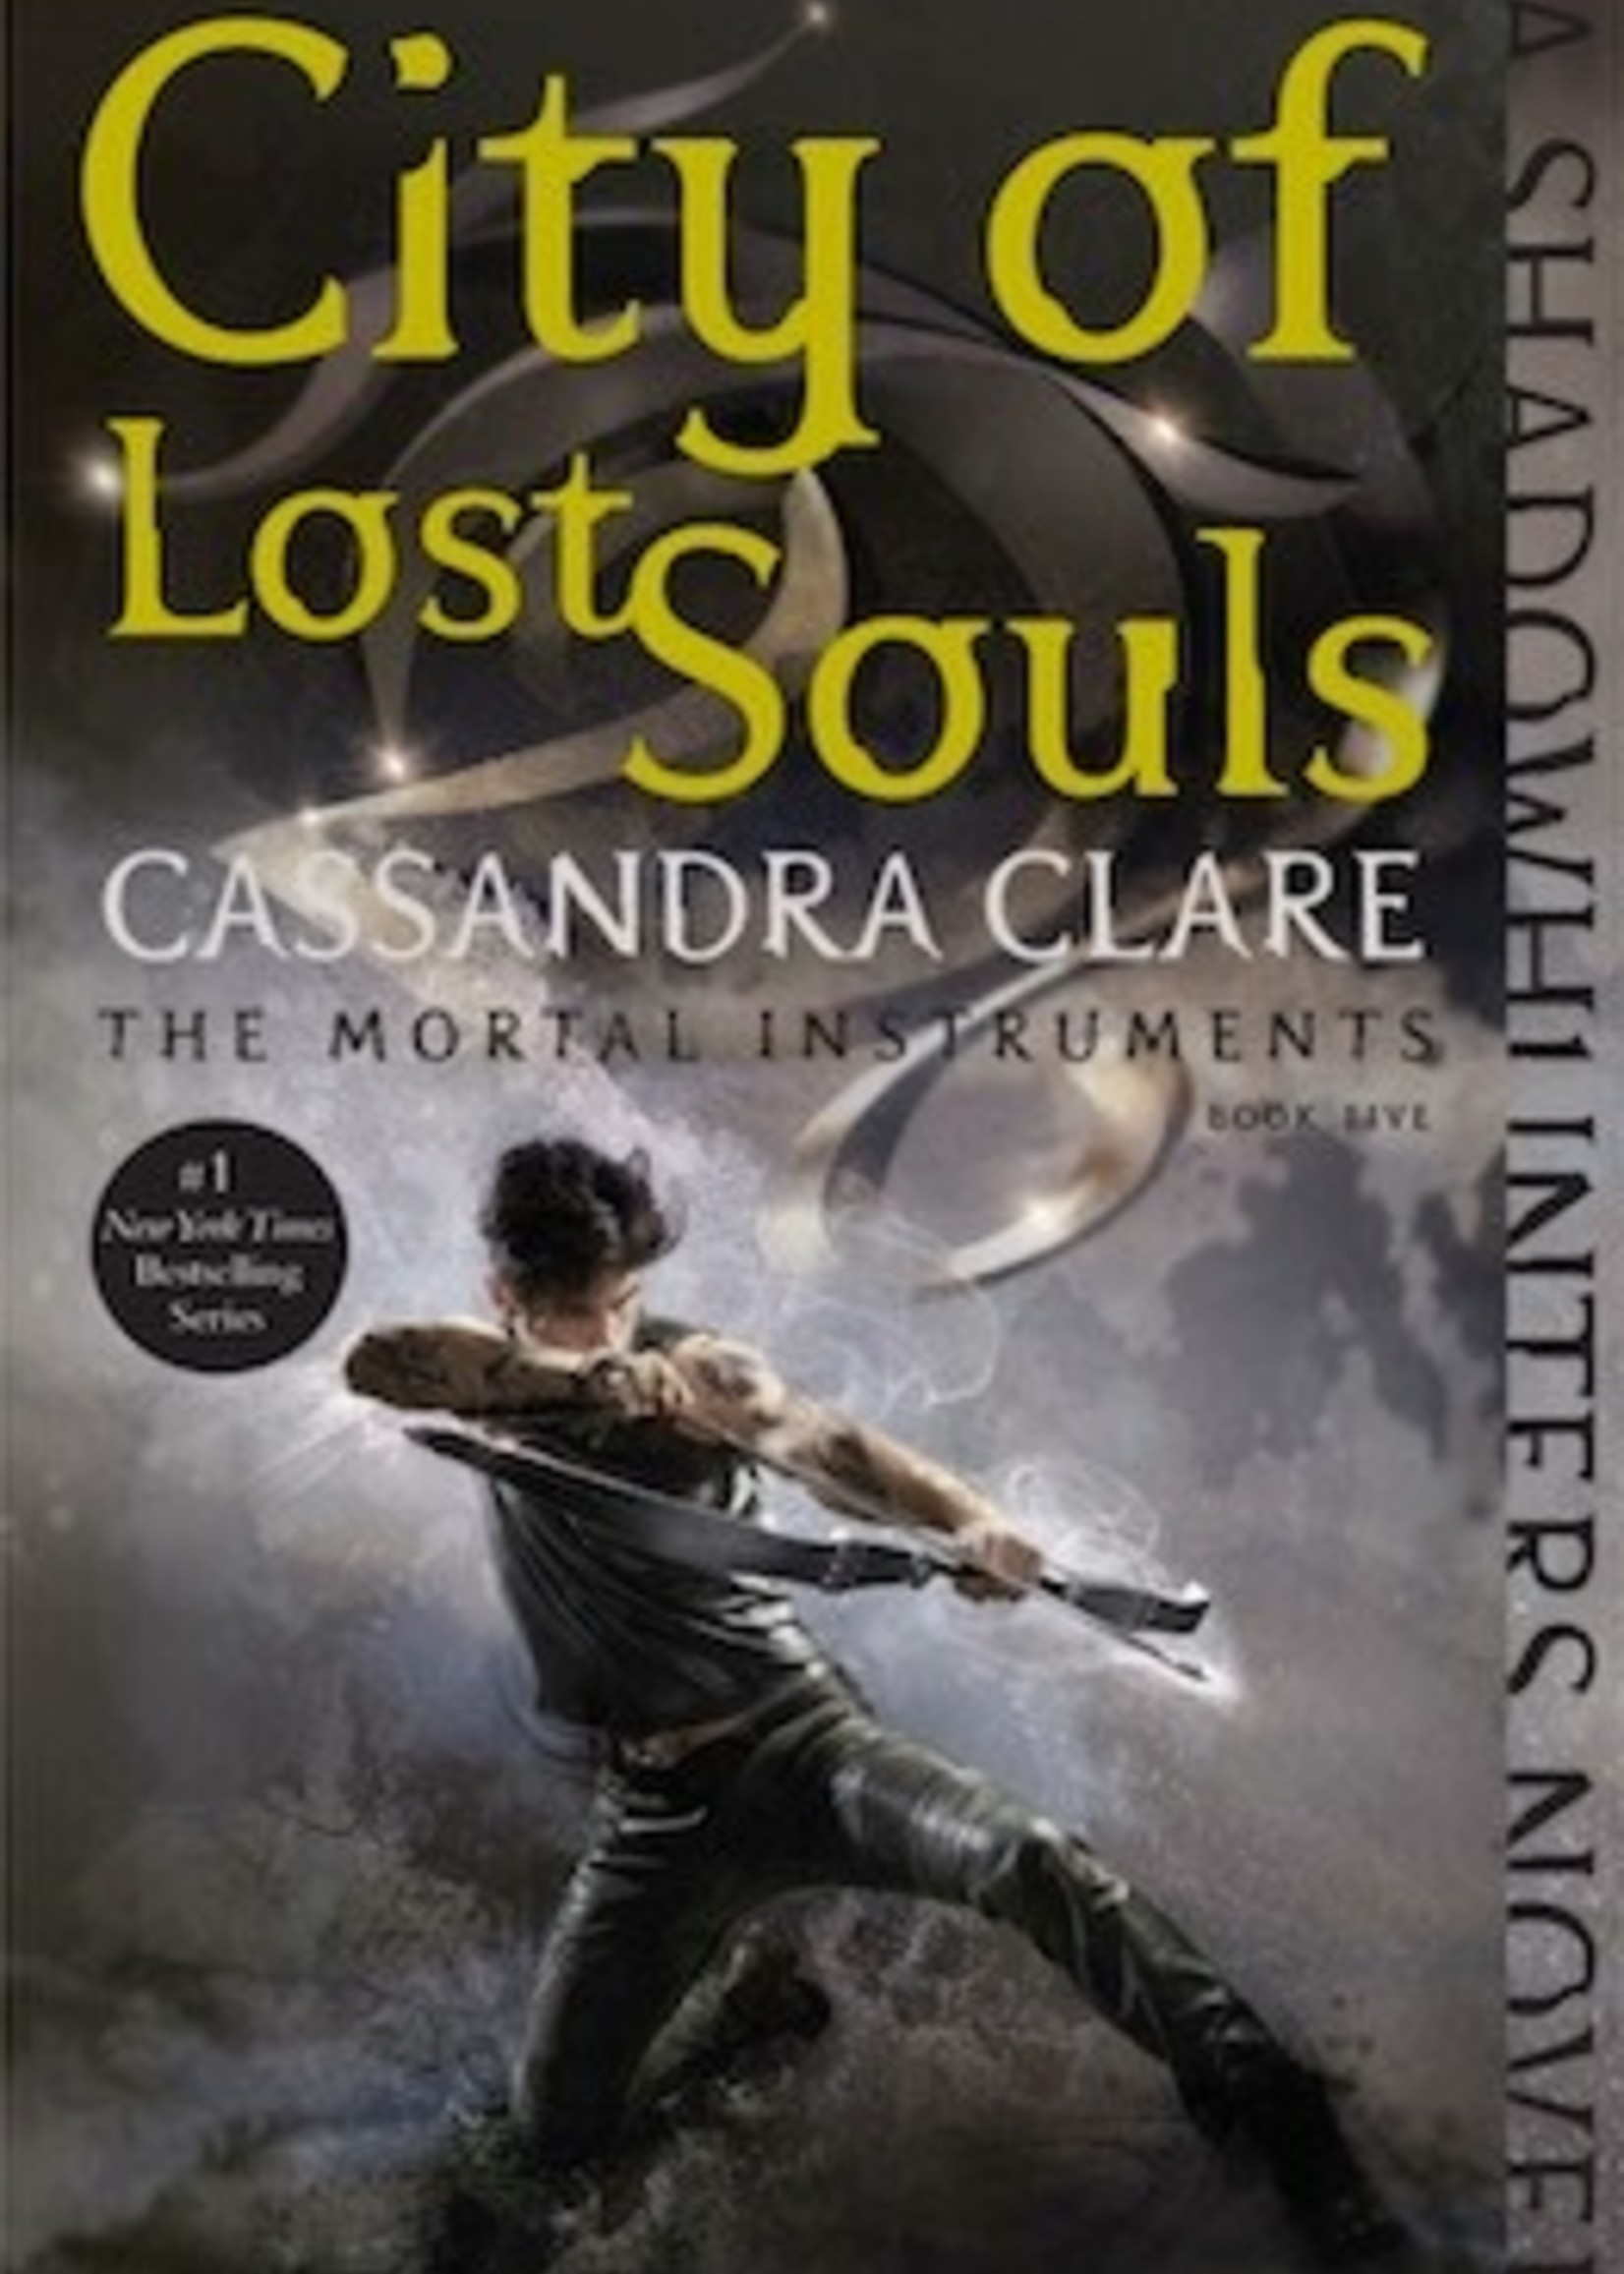 City of Lost Souls (The Mortal Instruments #5) by Cassandra Clare